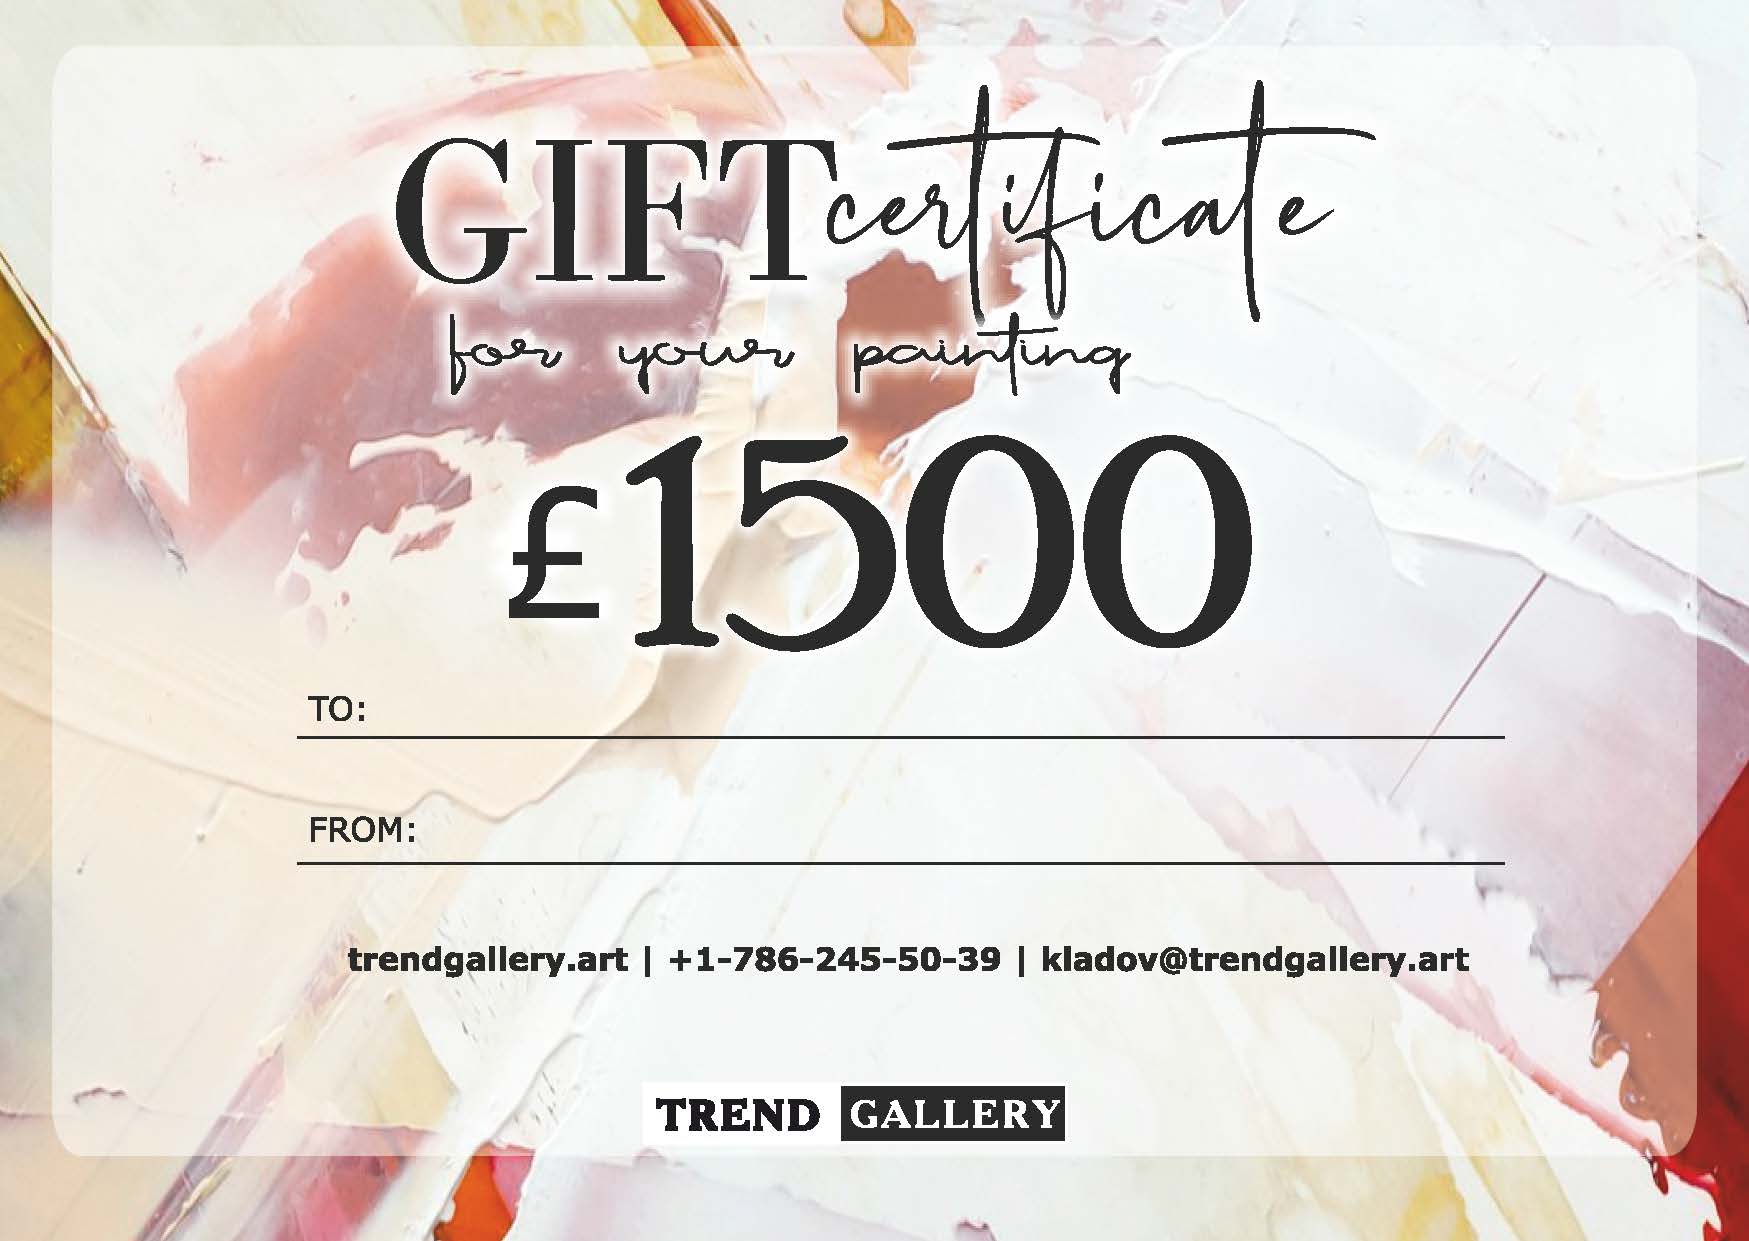 Gift Certificate For Painting Gift Card Best Gift Cards For Women Gift, Trend Gallery Art Great Britain – Trendgallery